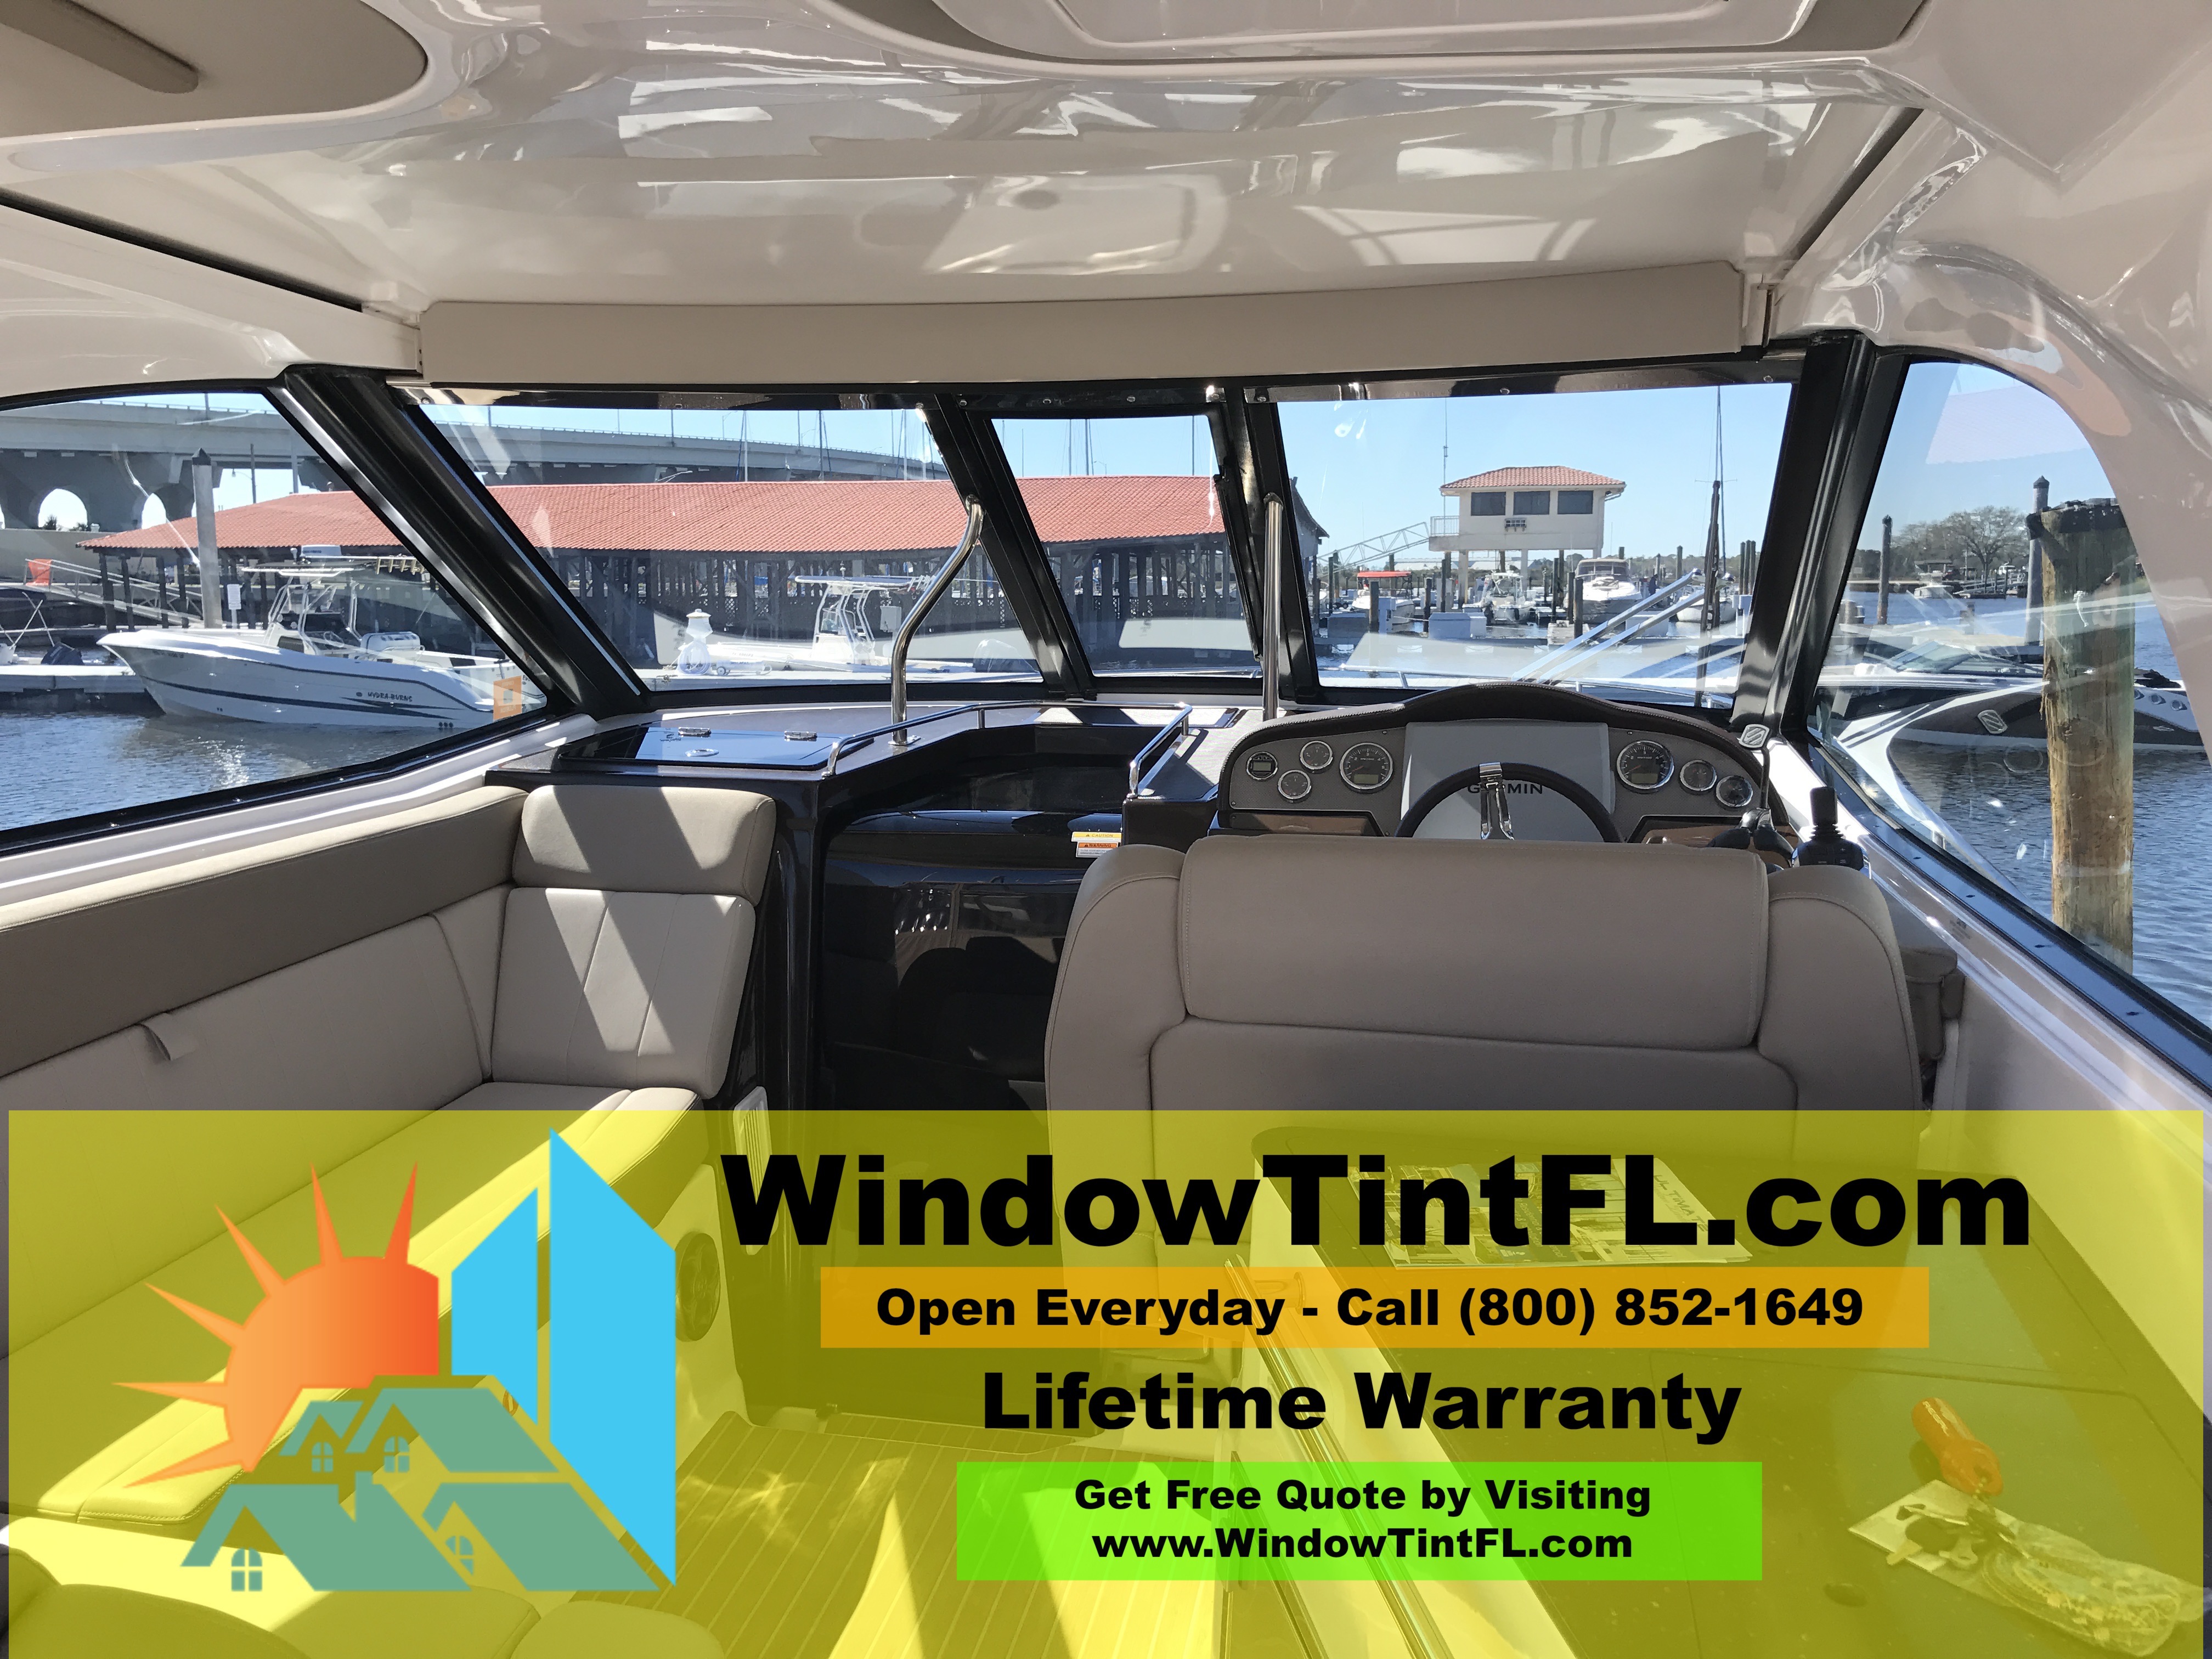 Boat Windshield Tint in Clearwater Florida - Marine Solar Tint